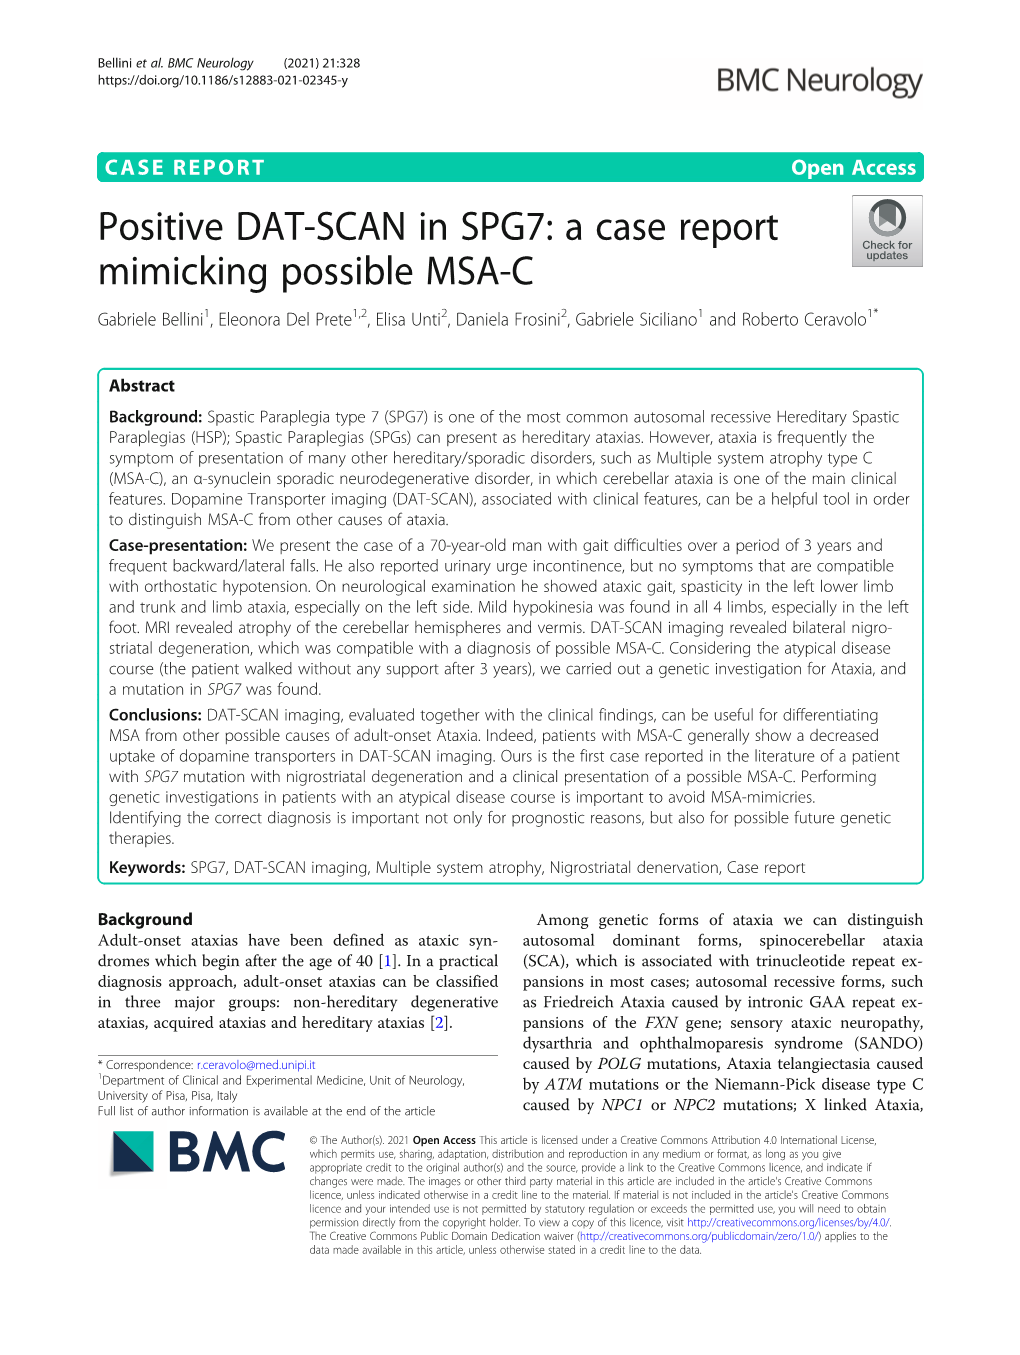 Positive DAT-SCAN in SPG7: a Case Report Mimicking Possible MSA-C